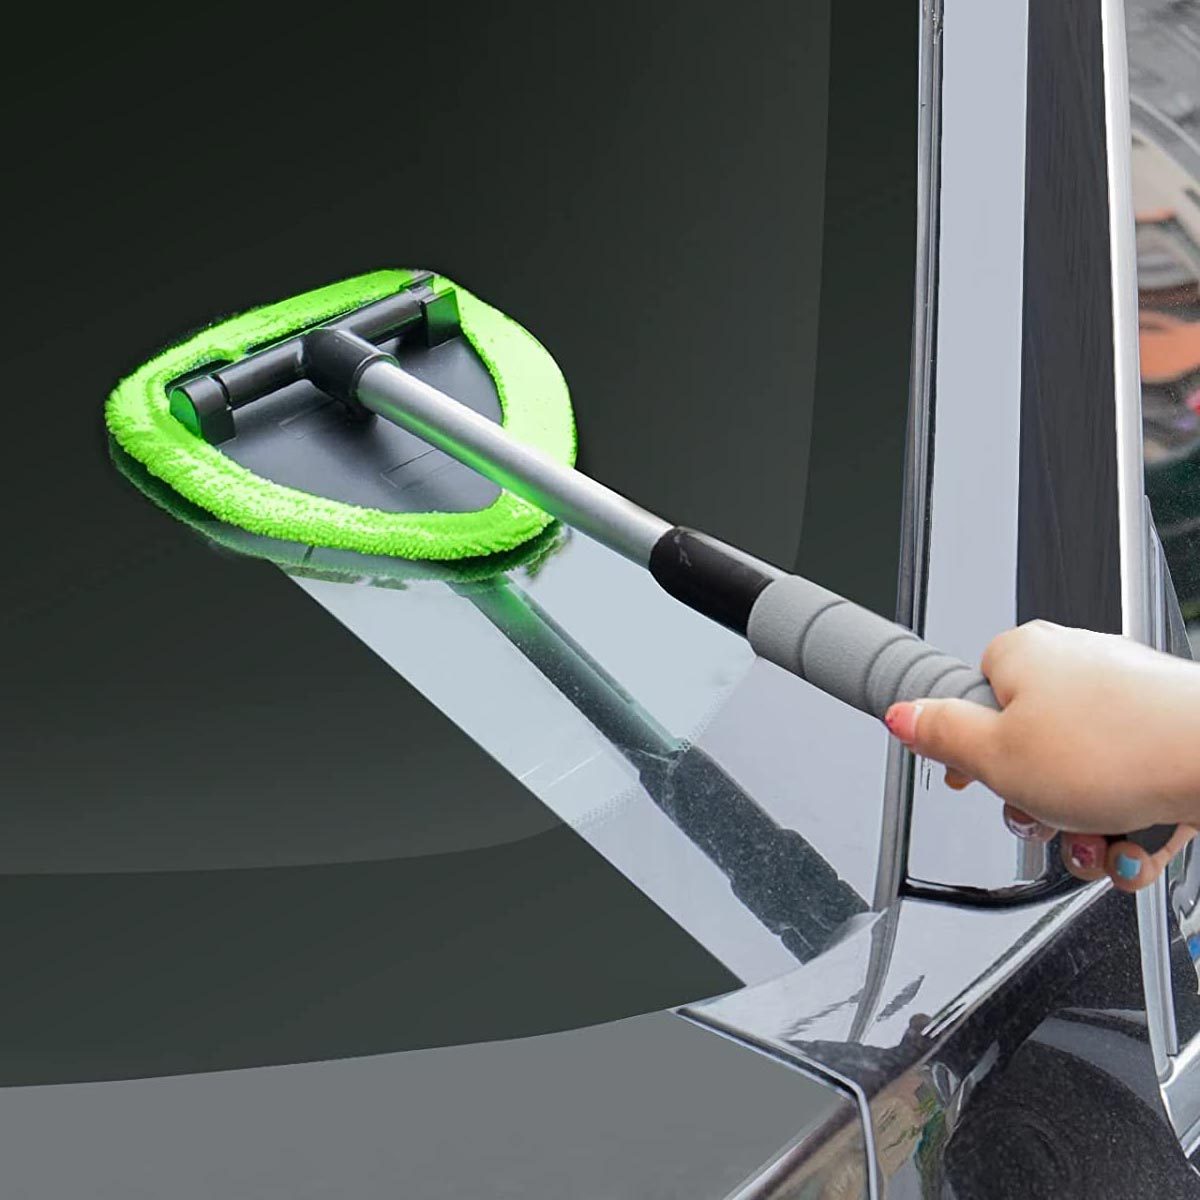 Exploring Our Essential Car Cleaning Accessories